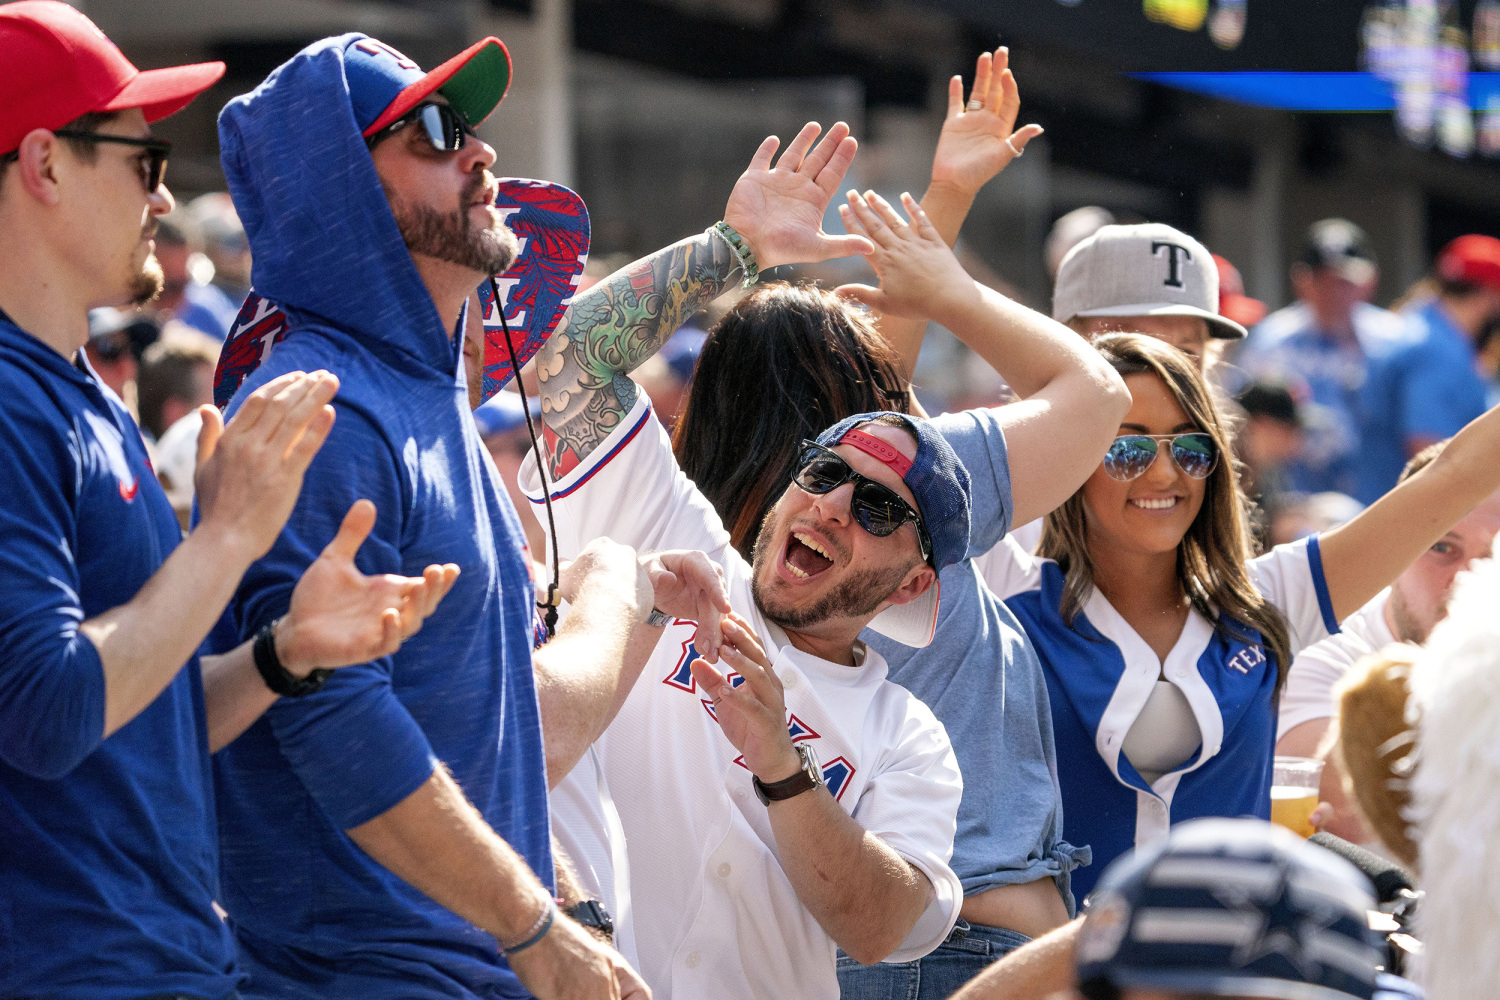 Fans Disregarded Masks Yesterday at the Blue Jays and Texas Rangers Game 